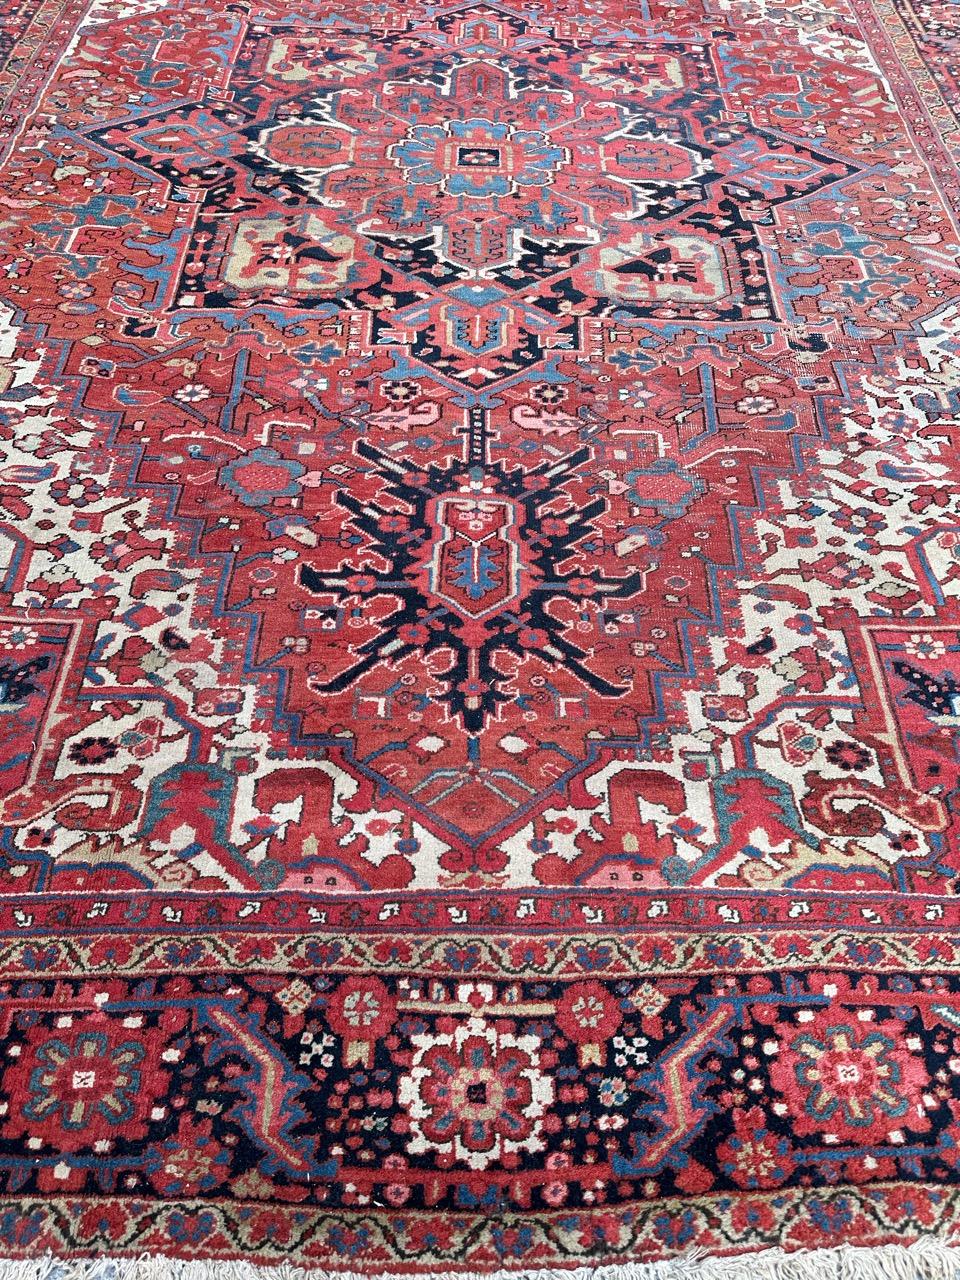 Discover a magnificent antique Heriz-style rug, boasting exquisite geometric and decorative patterns in rich, natural hues. This masterpiece is meticulously hand-knotted with sumptuous wool velvet on a cotton foundation. 

At its center, a